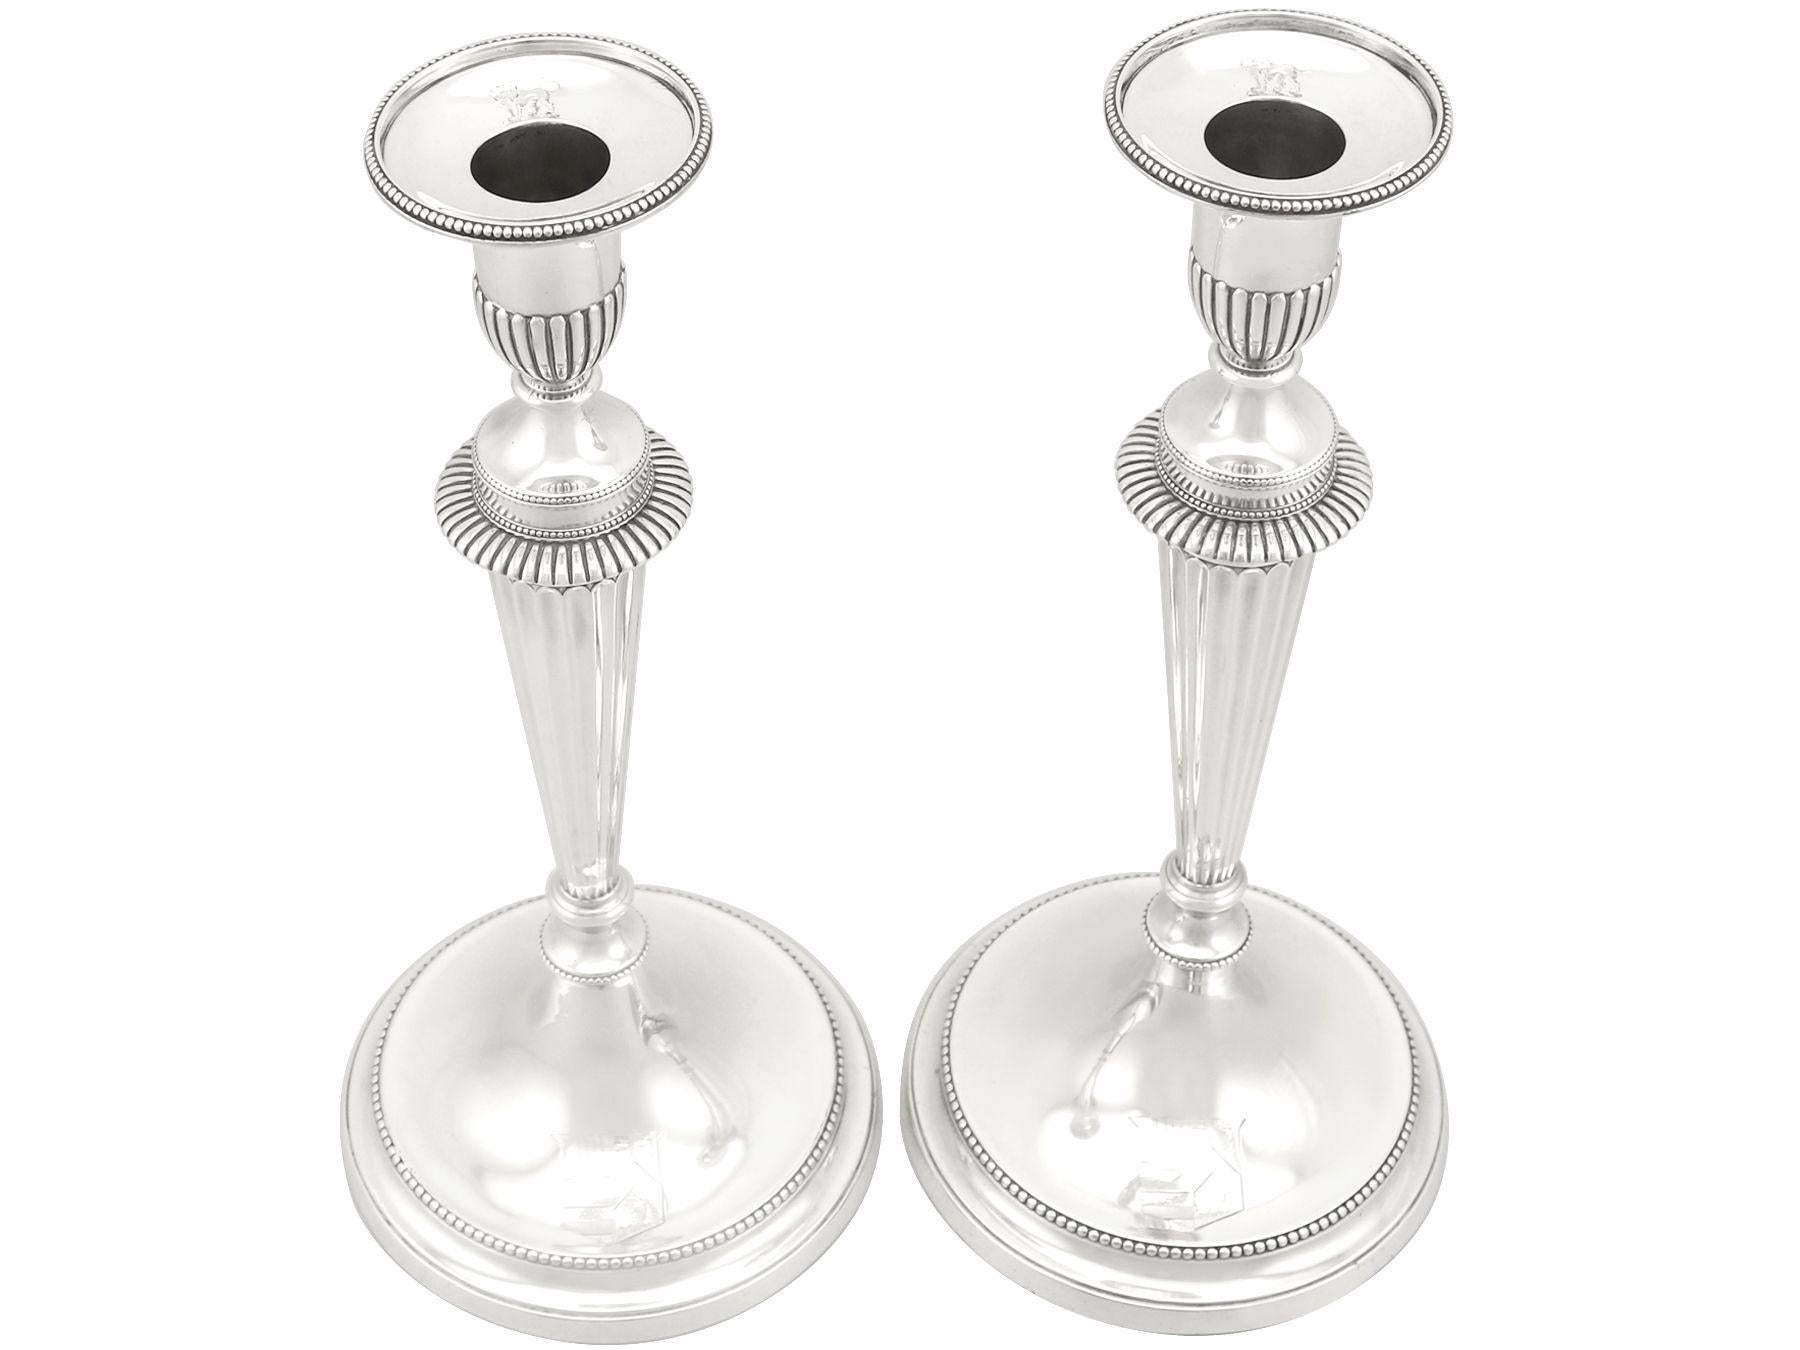 A magnificent, fine and impressive pair of antique George III English cast sterling silver candlesticks made by John Schofield; part of our Georgian ornamental silverware collection.

These magnificent antique George III English cast sterling